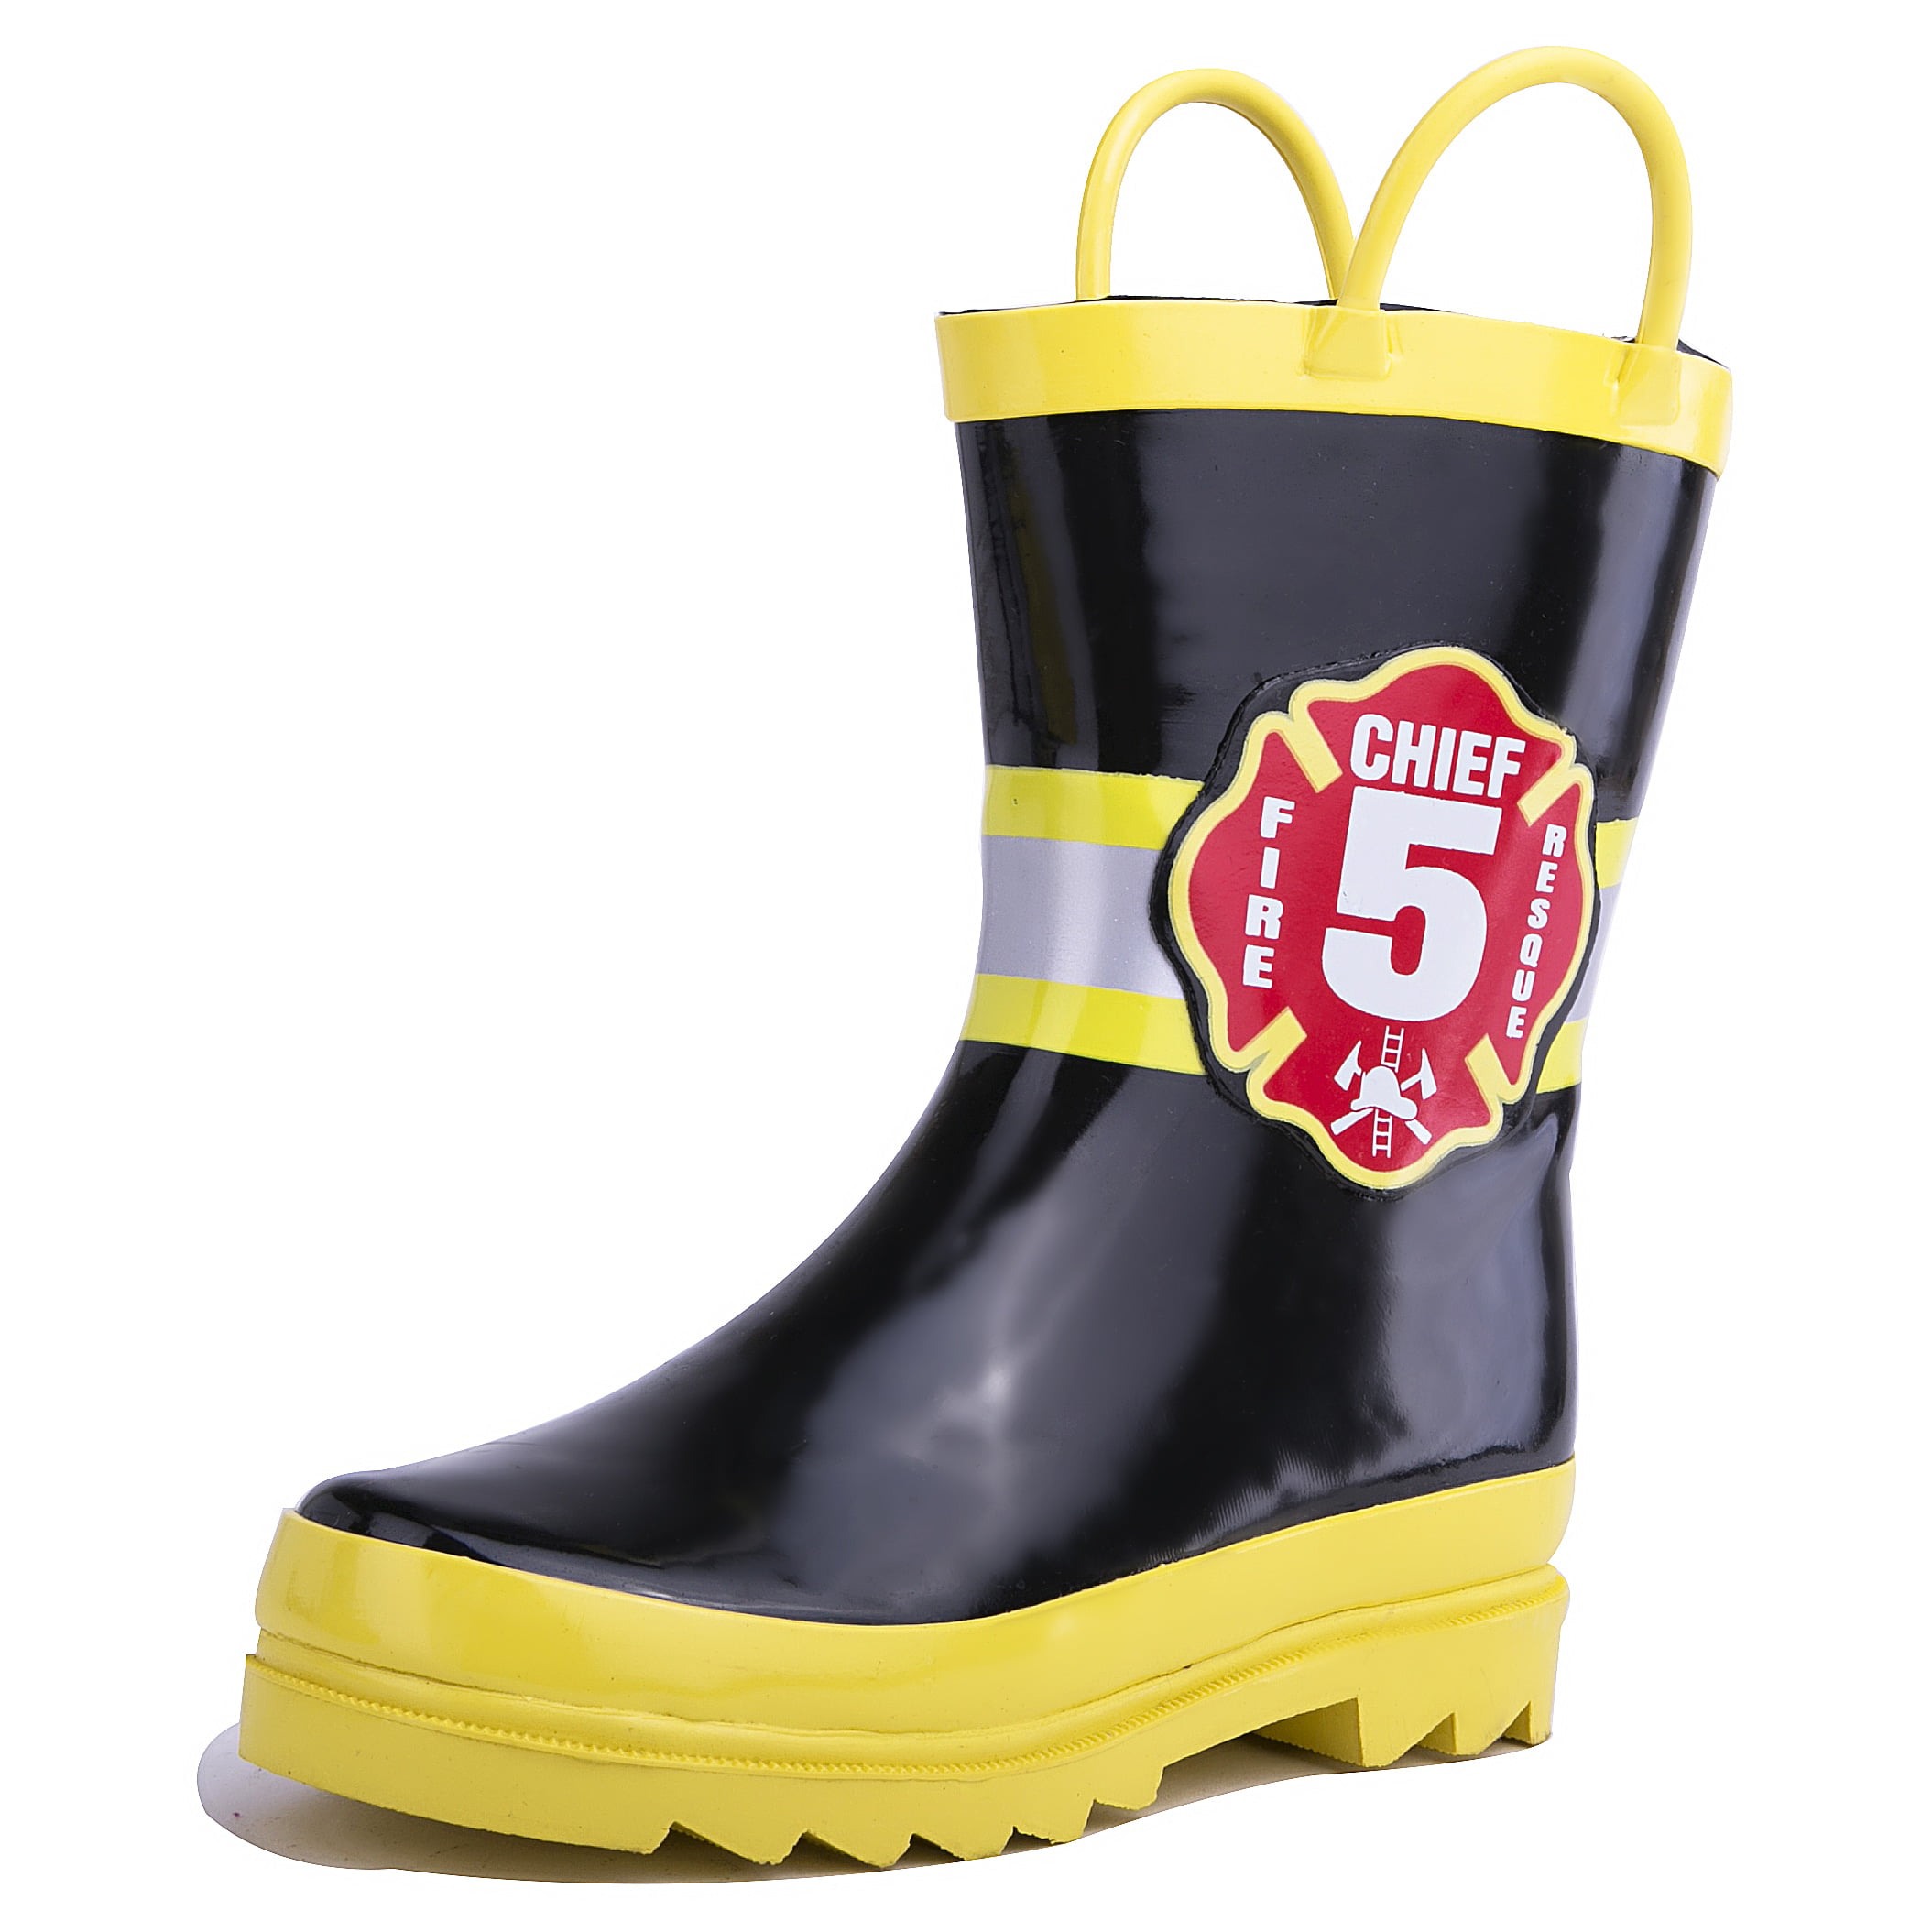 rain boots for toddlers size 4